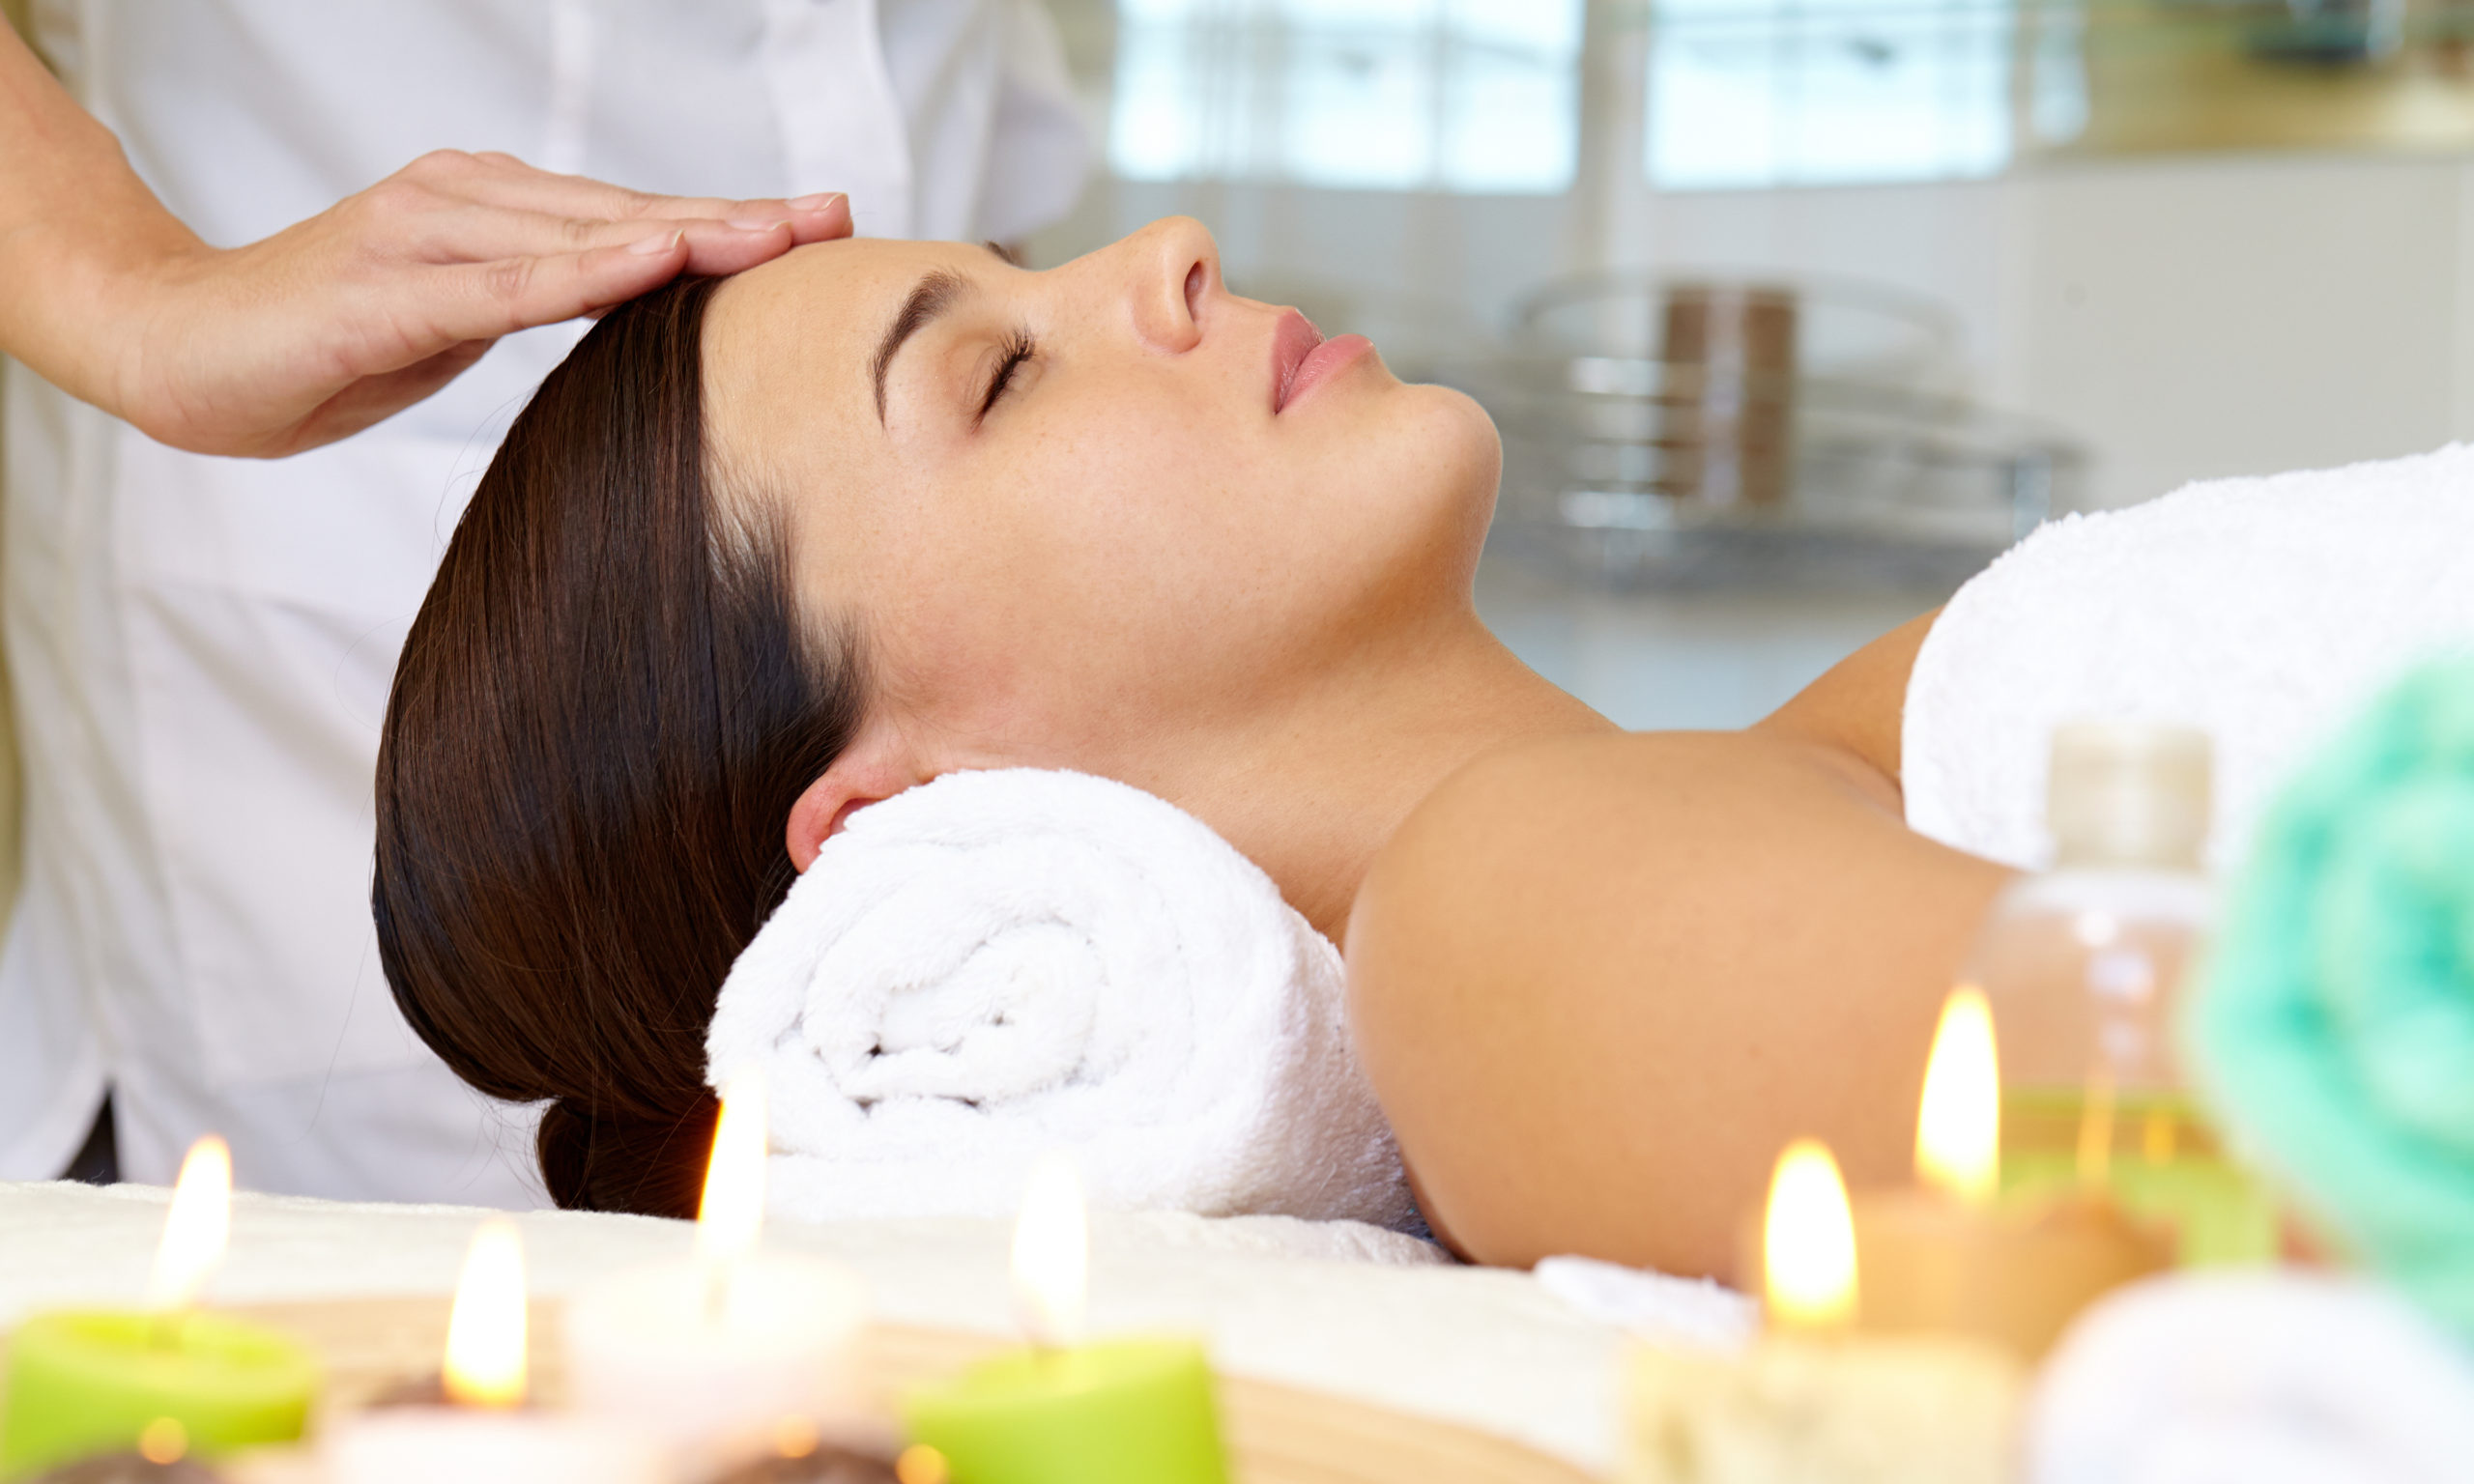 Natural Therapies: Reiki 1 to Master Level Certification